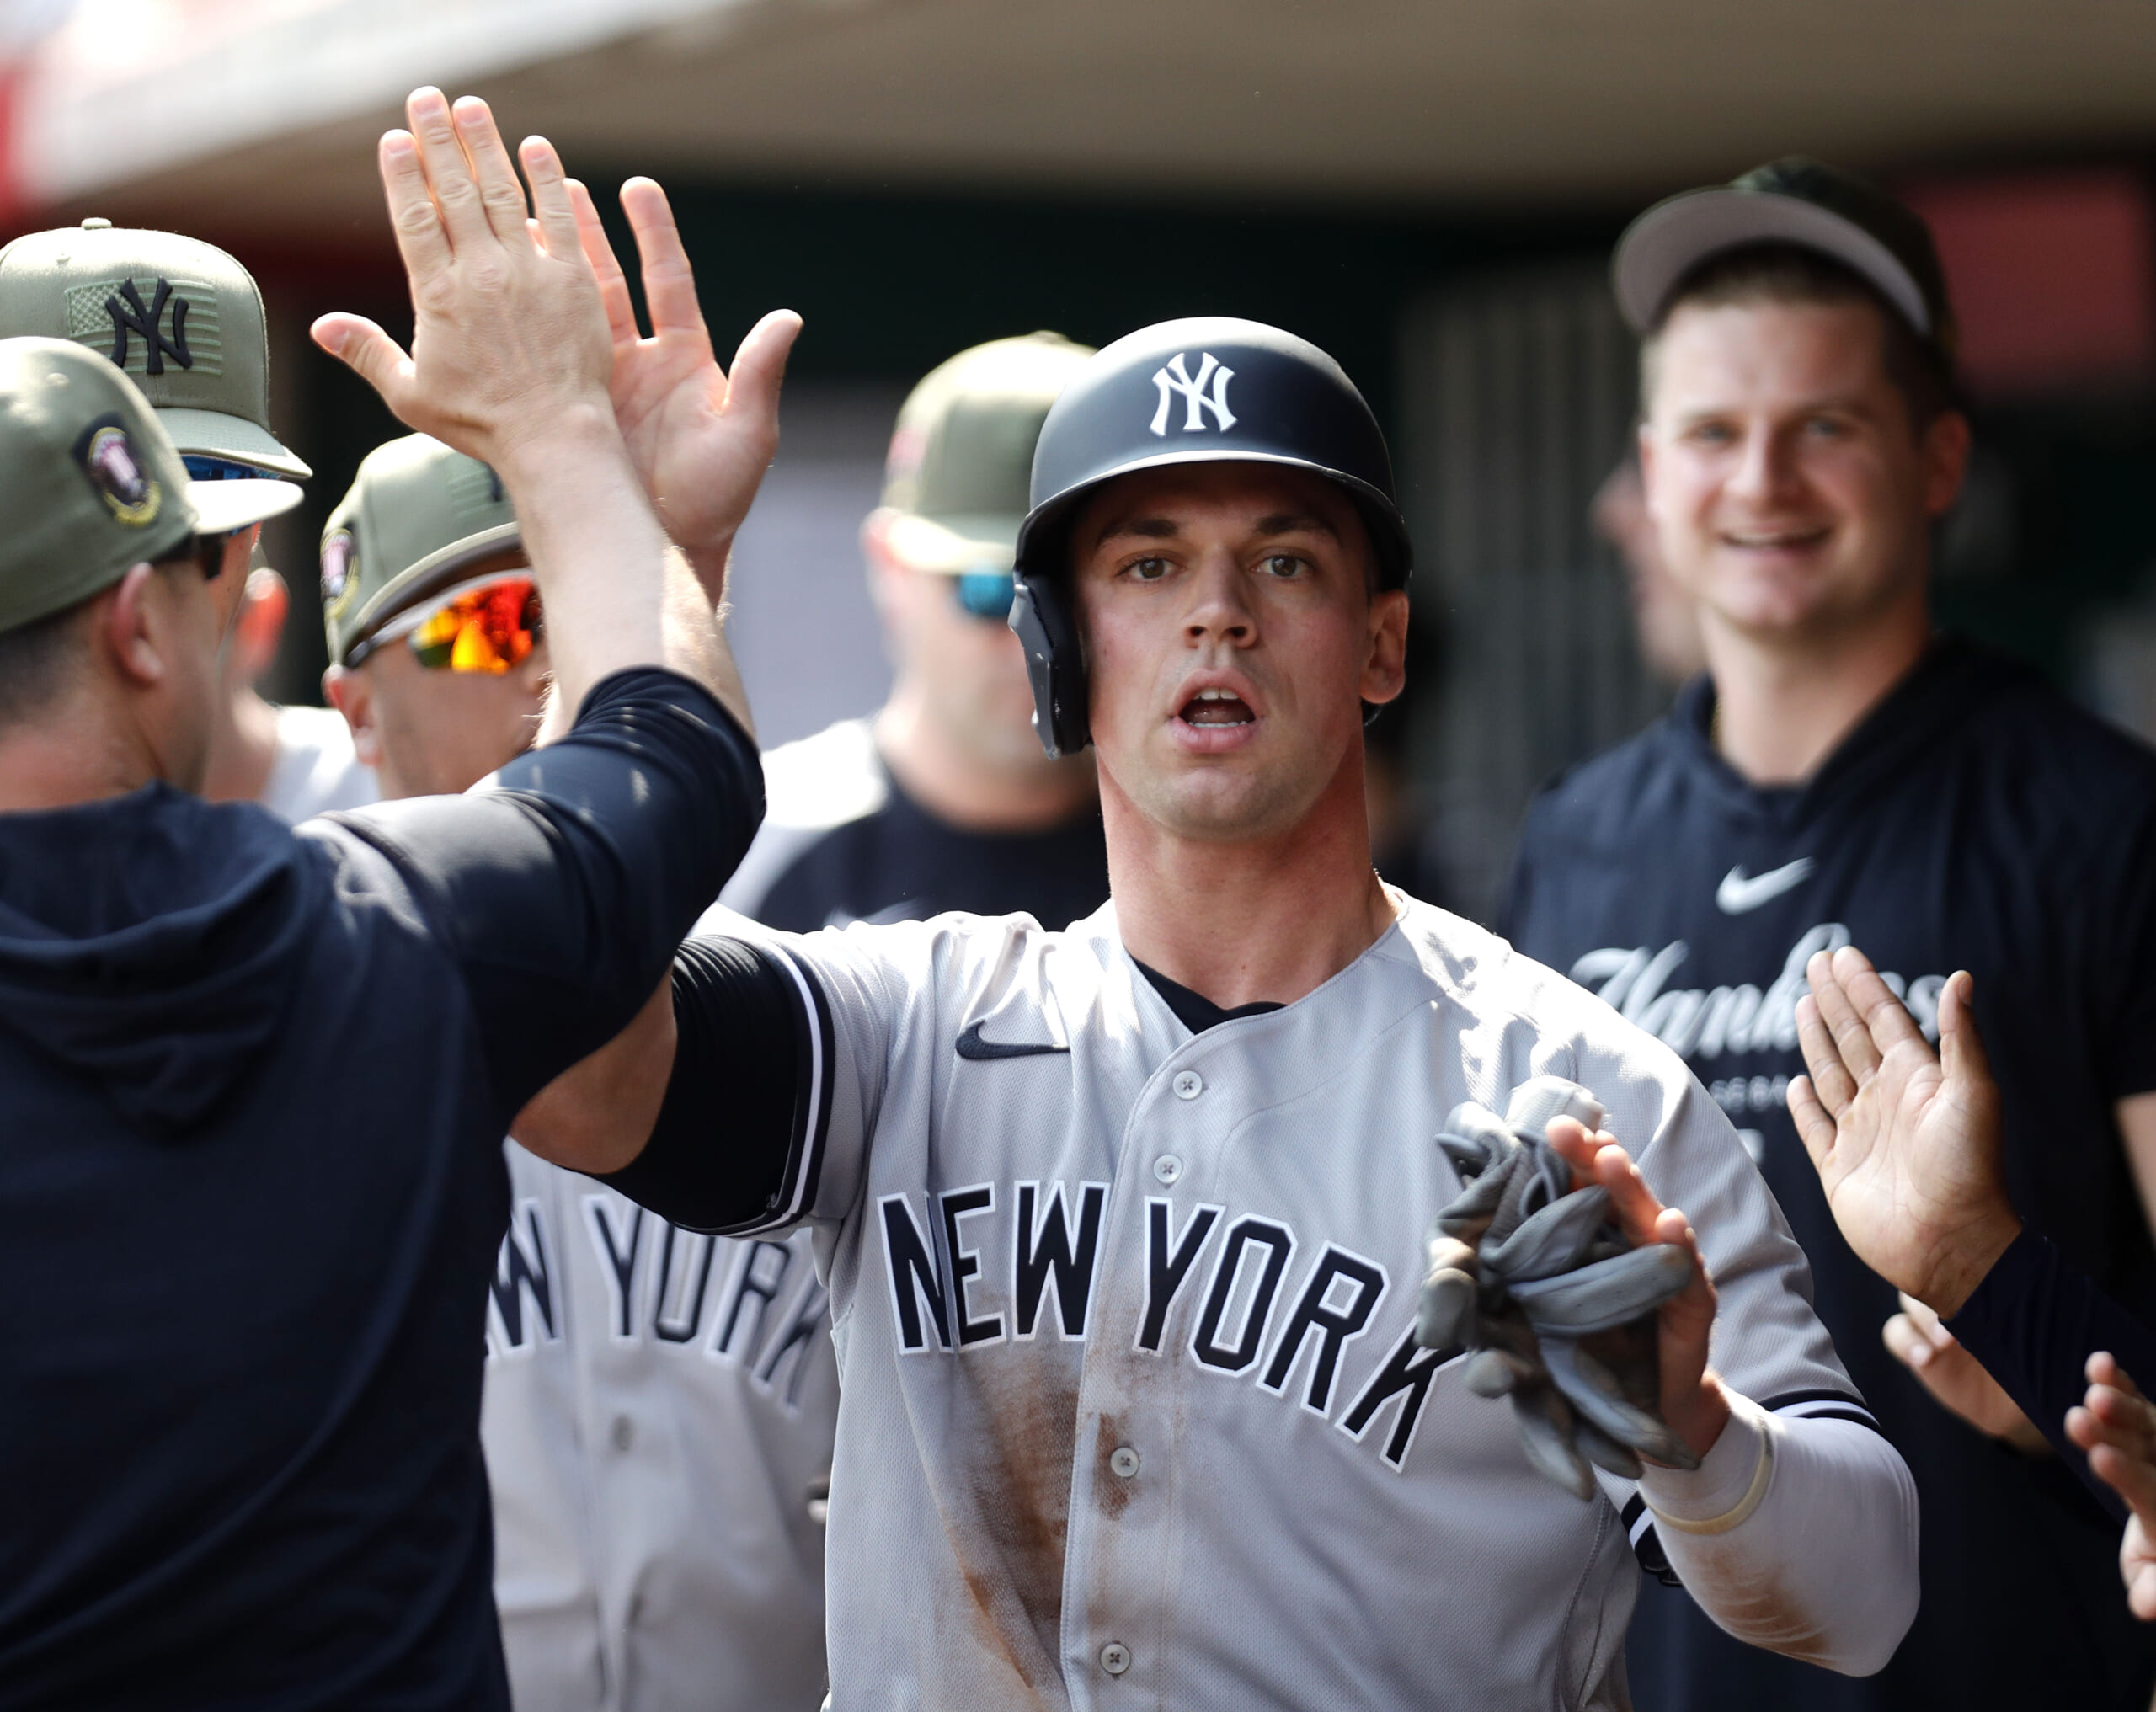 New York Yankees Catcher Kyle Higashioka Ended Home Run Drought After  Advice From Jose Trevino - Sports Illustrated NY Yankees News, Analysis and  More